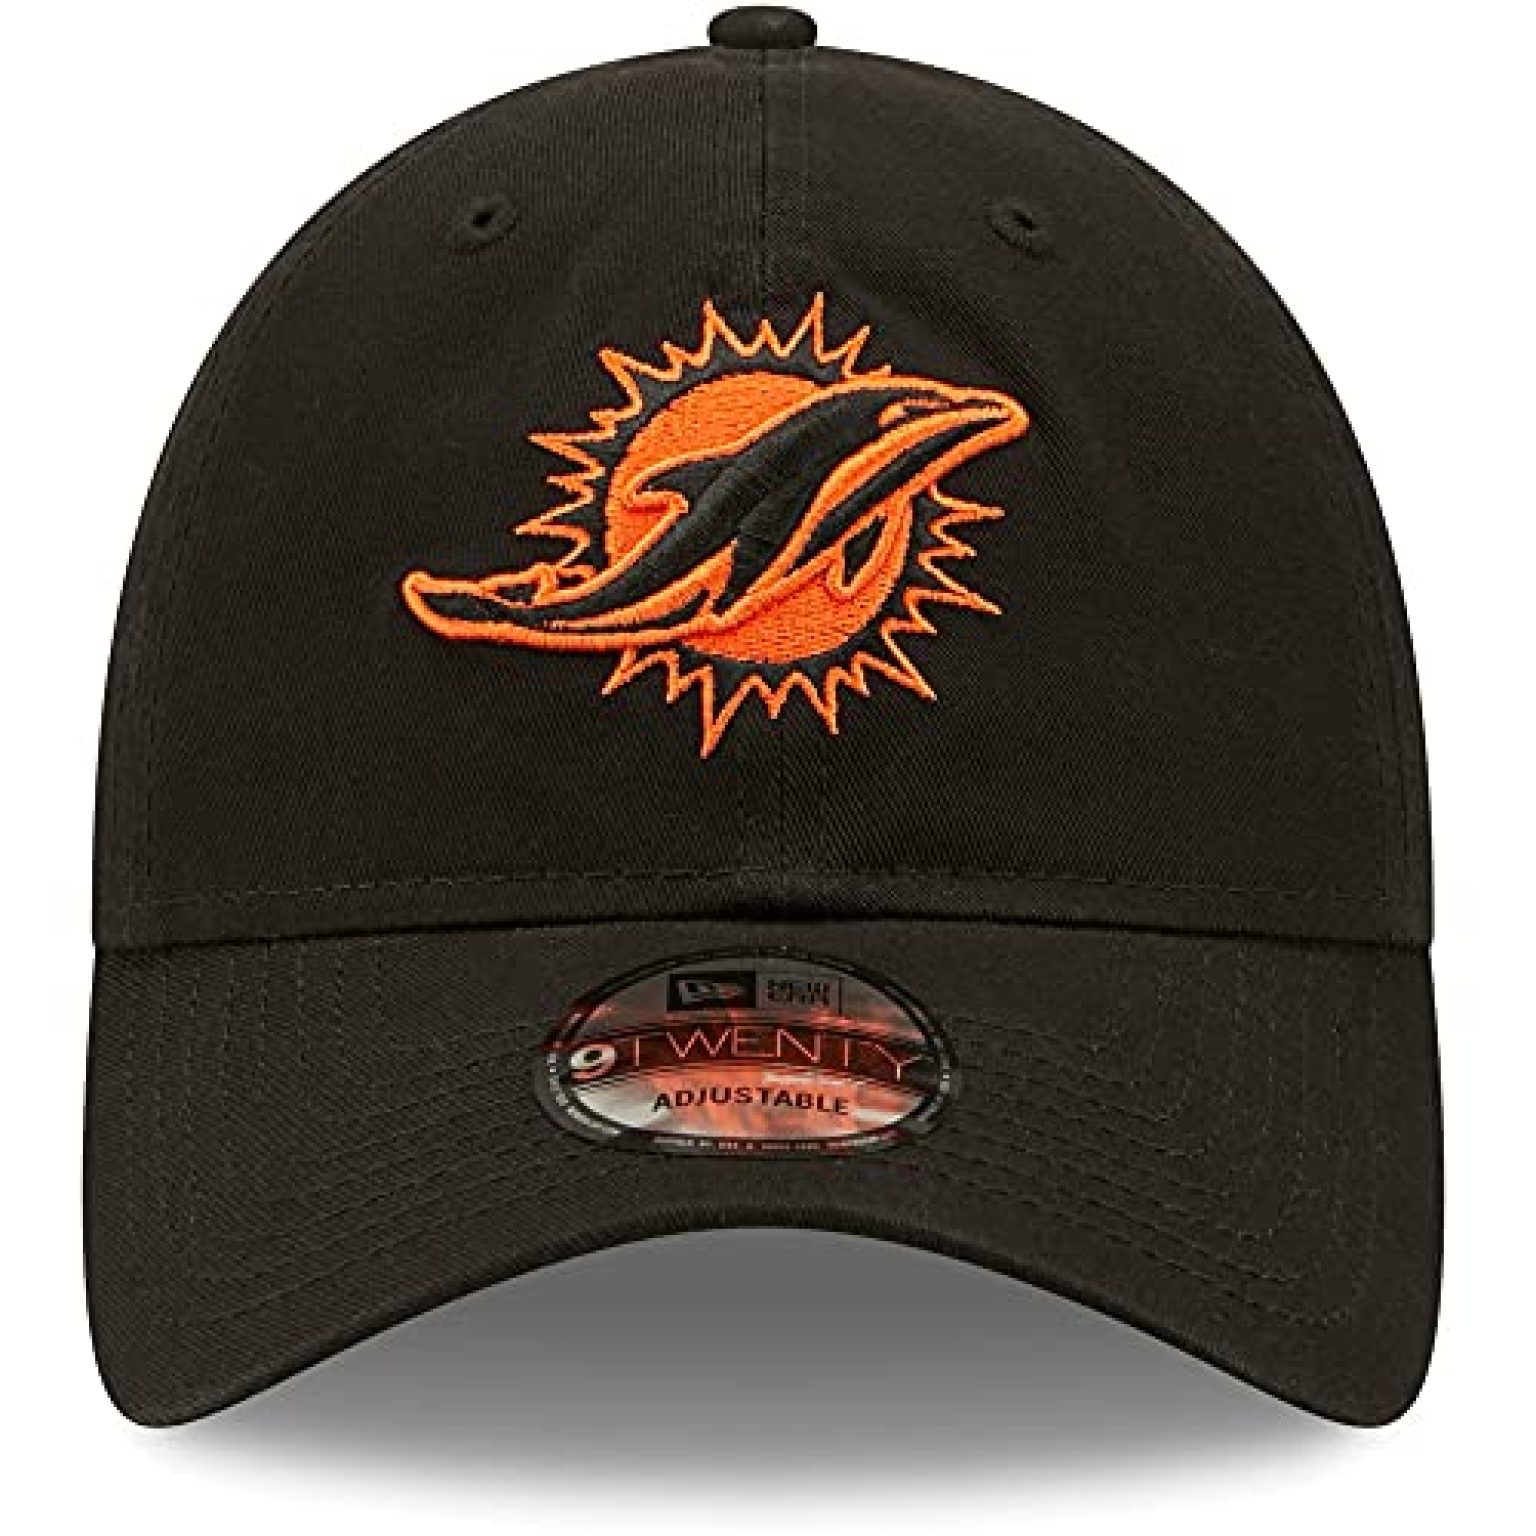 Black Core Classic Miami Dolphins Adjustable Hat | Sports Hard Hats